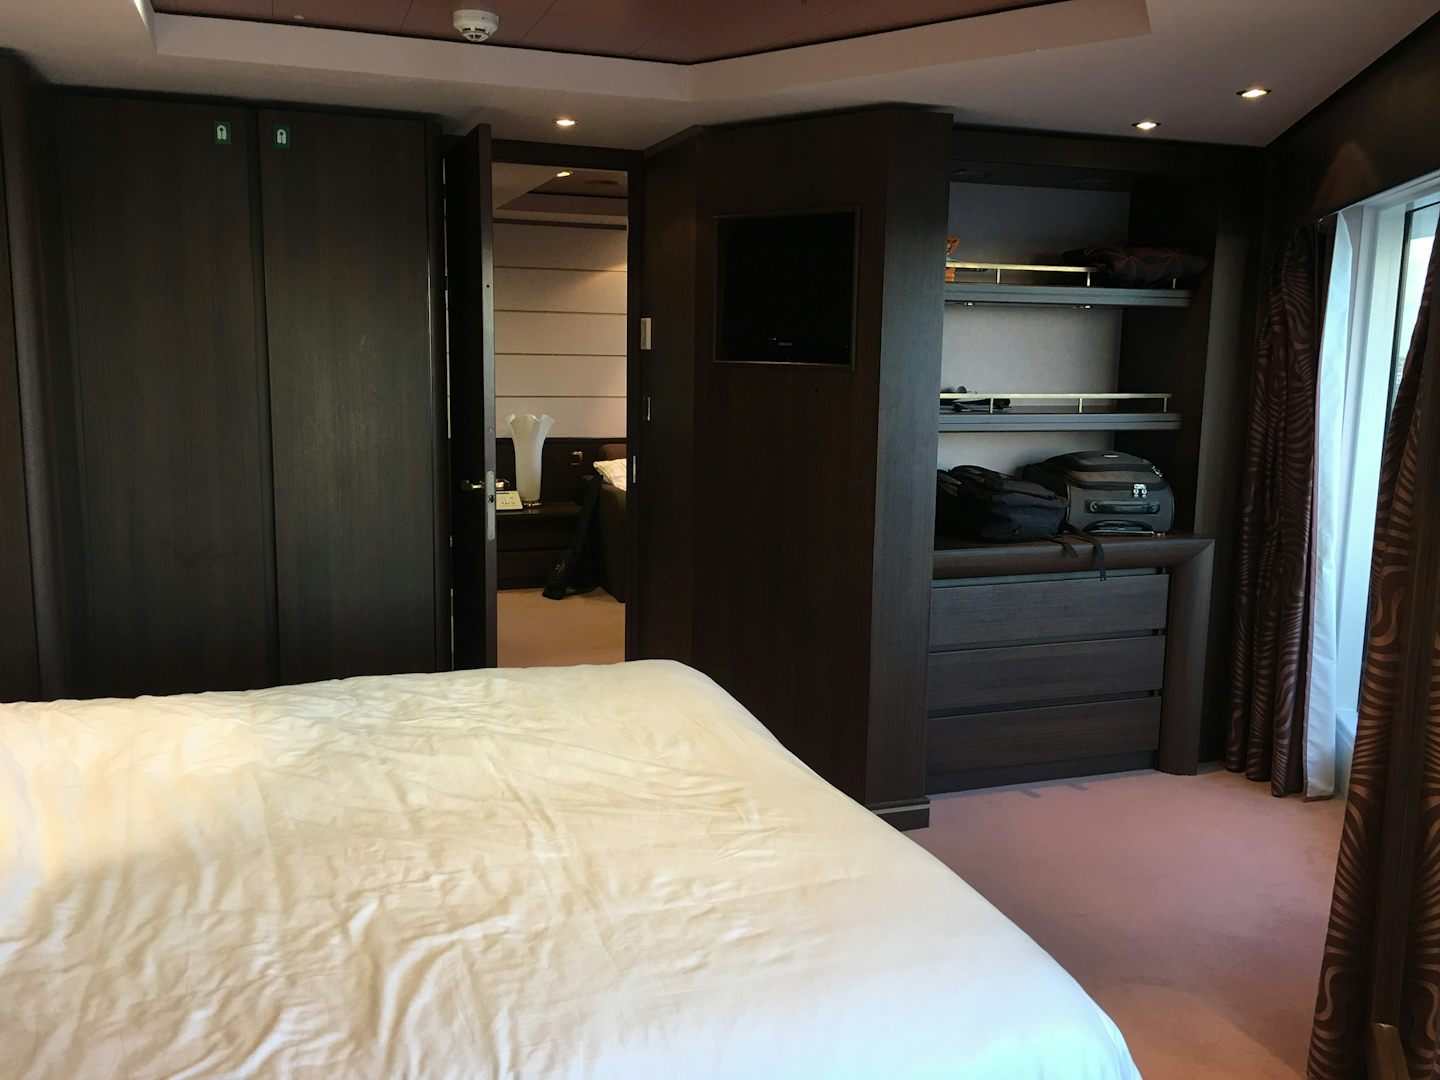 Bedroom of suite (not made up by steward)